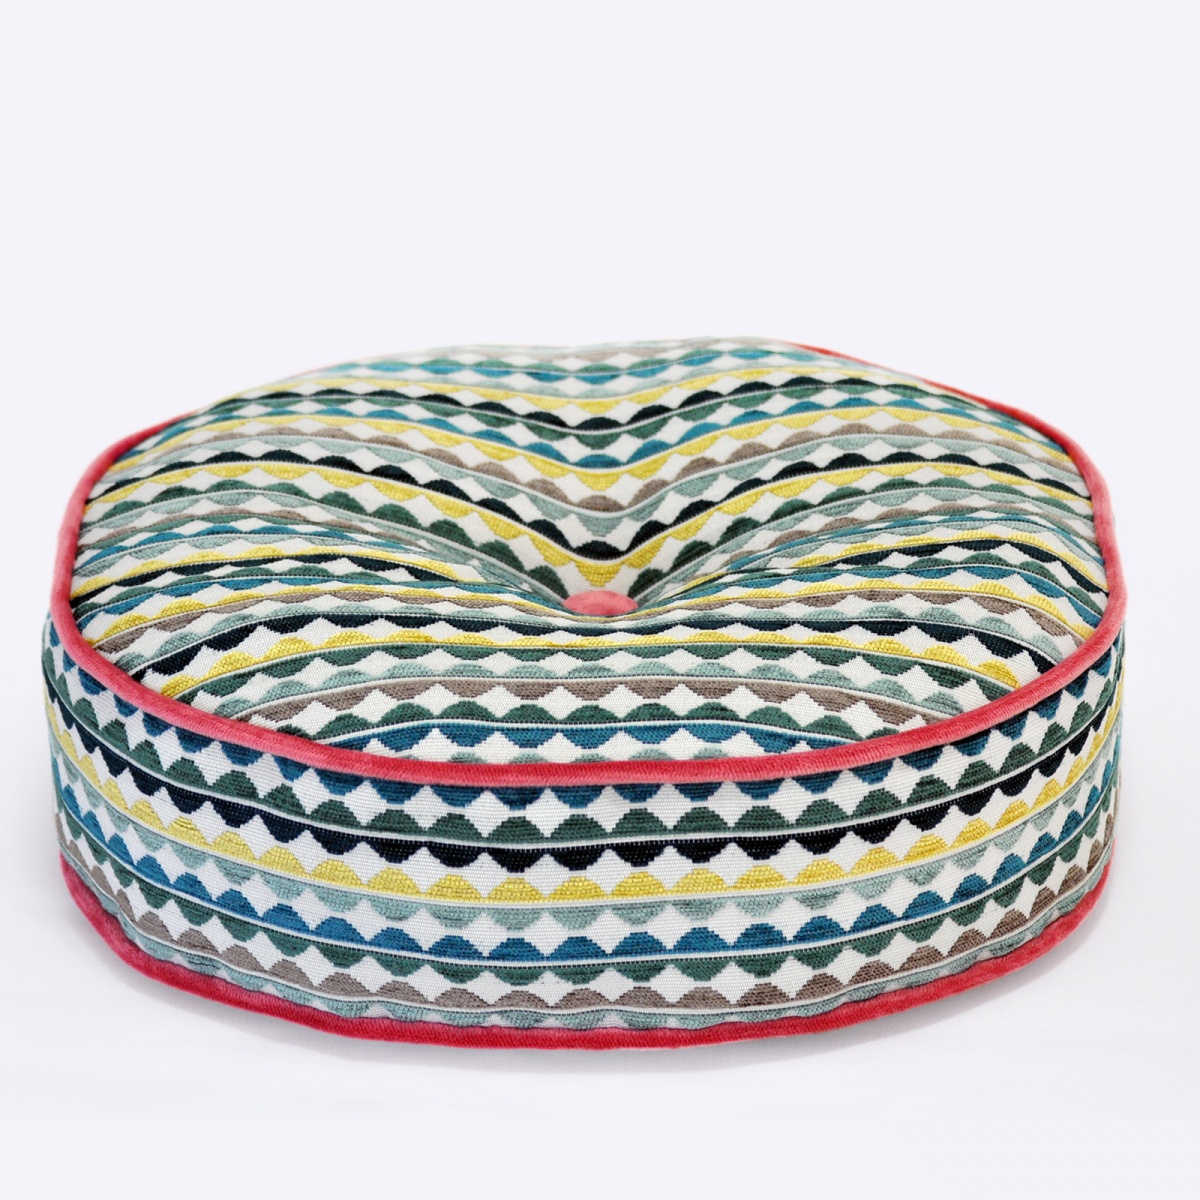 Olley Acacia Round Cushion with Scandinavian Pink Piping - 45cm